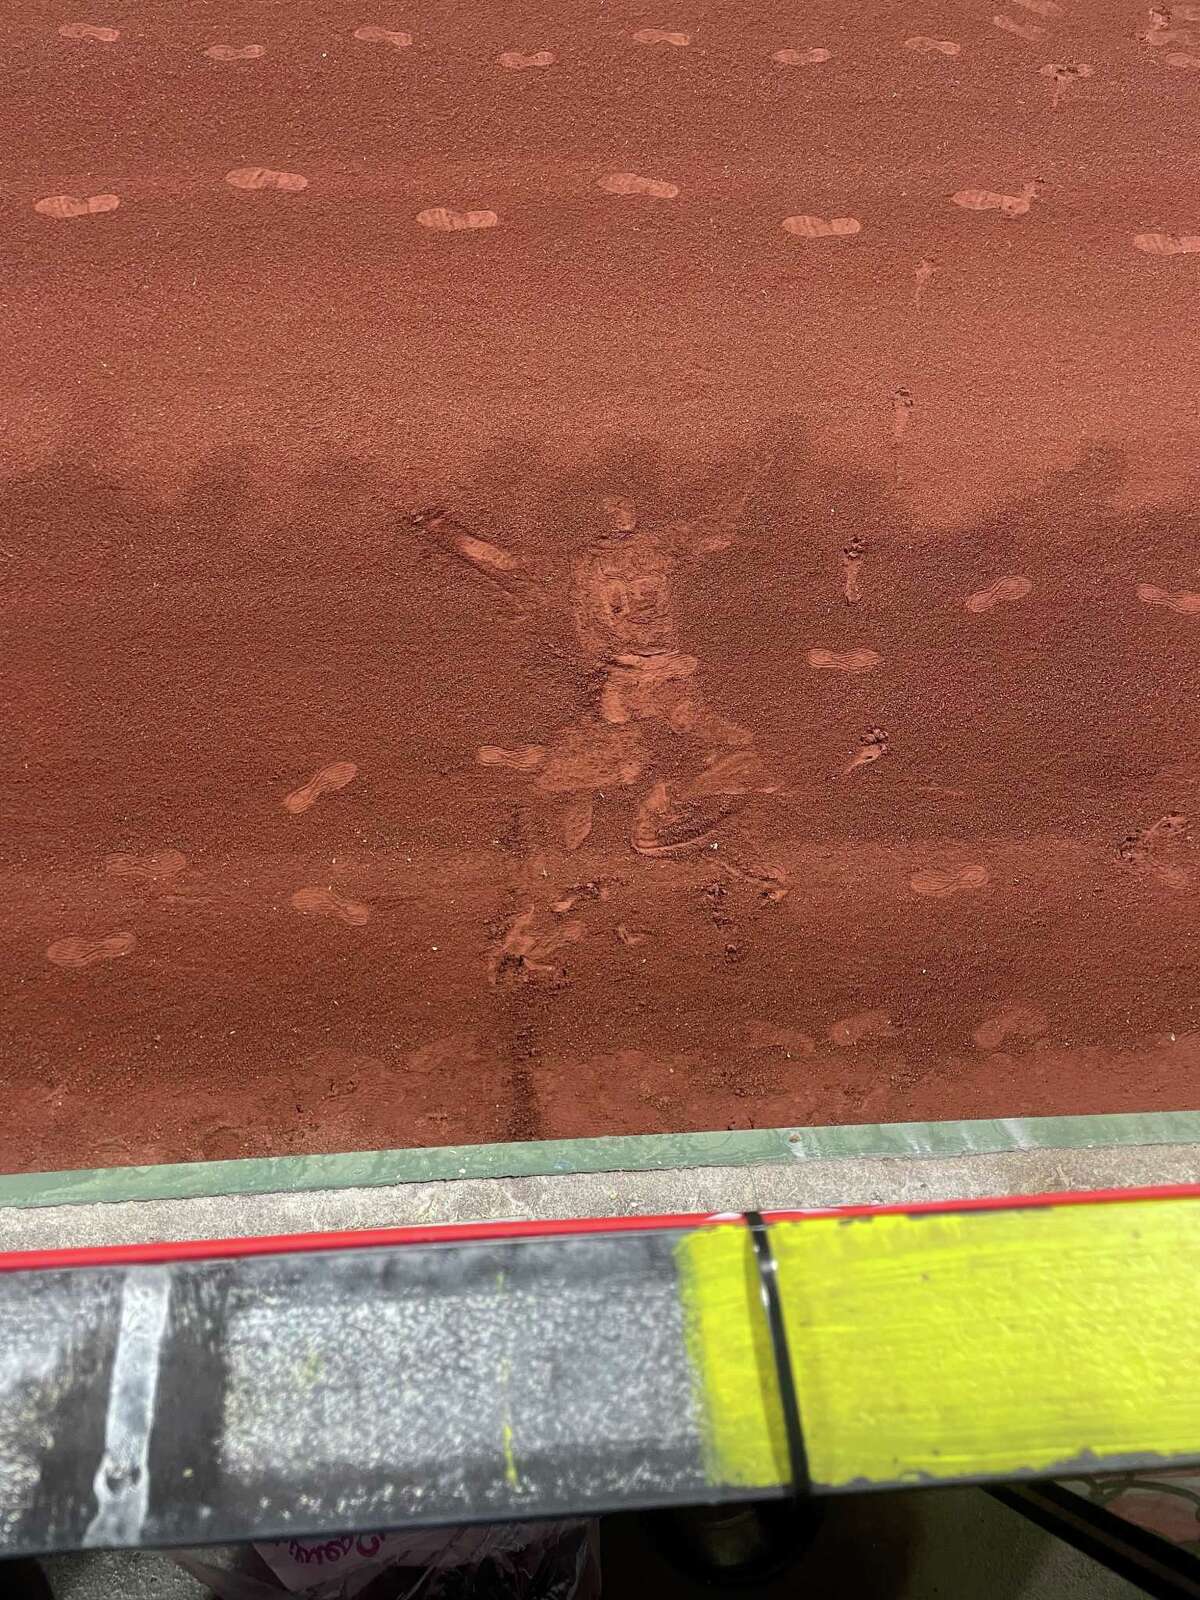 Astros fan who took the Chas McCormick dirt imprint photo